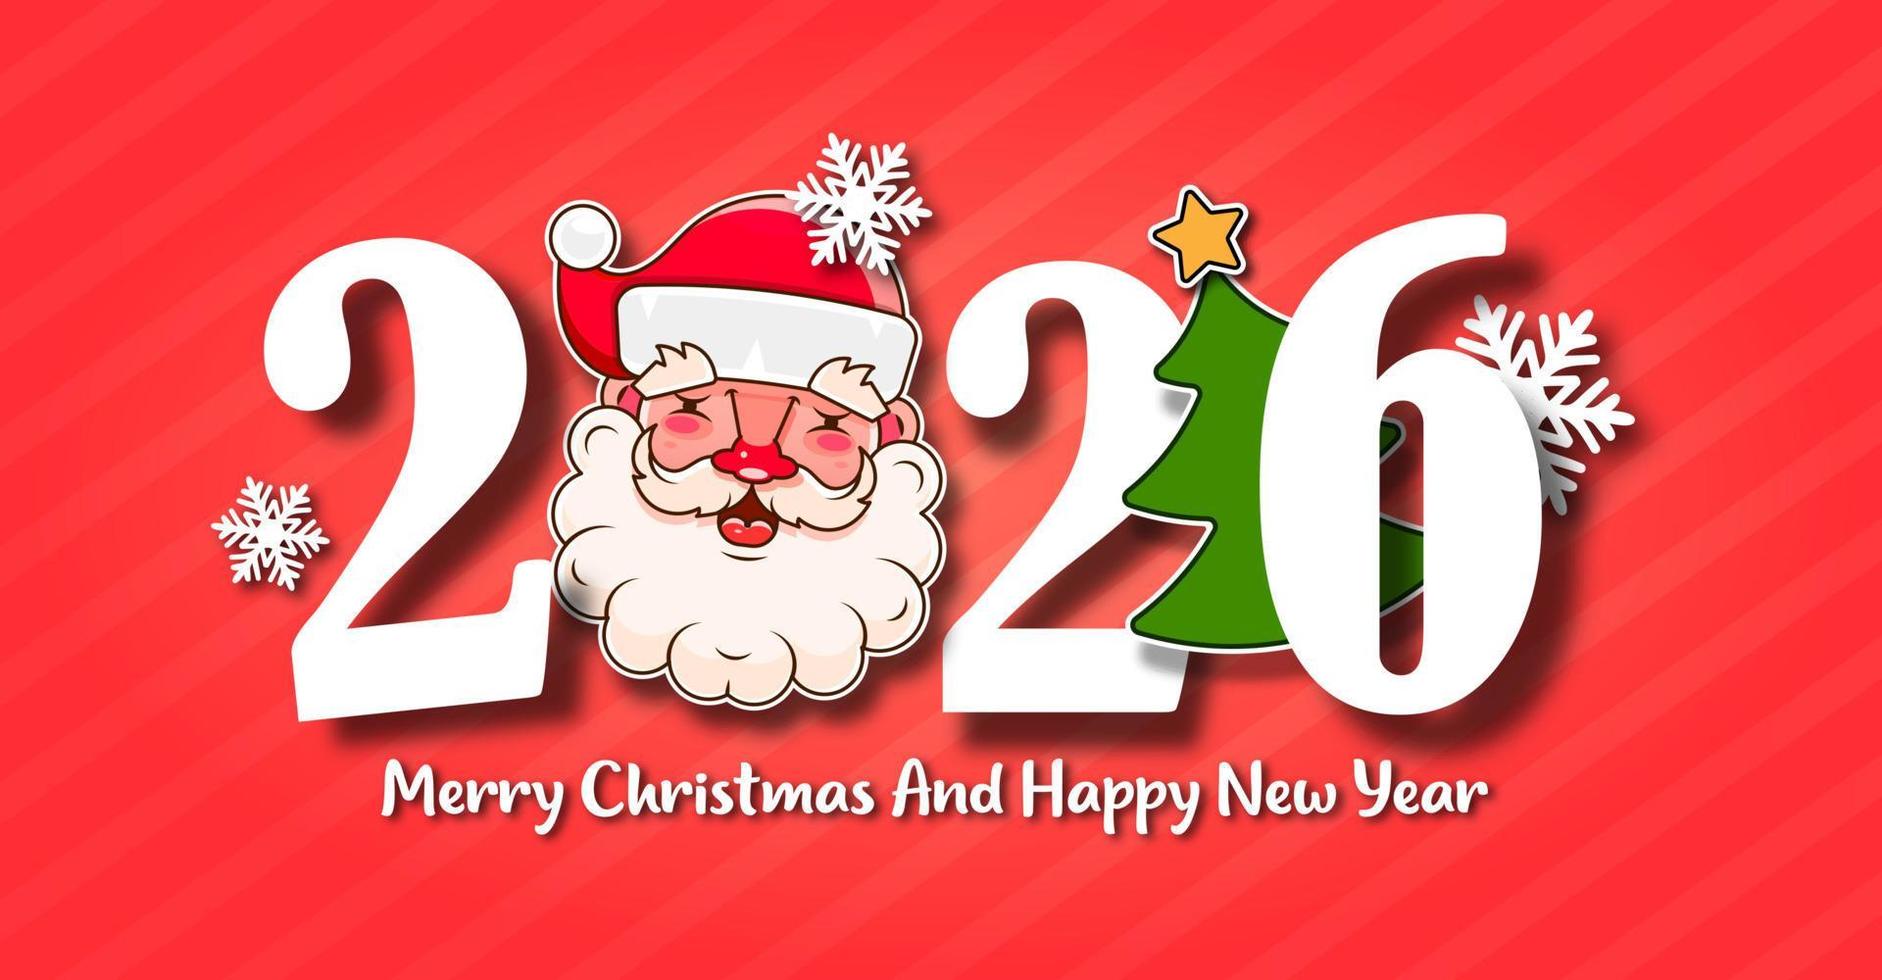 I Wish You A Merry Christmas And Happy New Year Vintage Background With Typography. 2026 vector